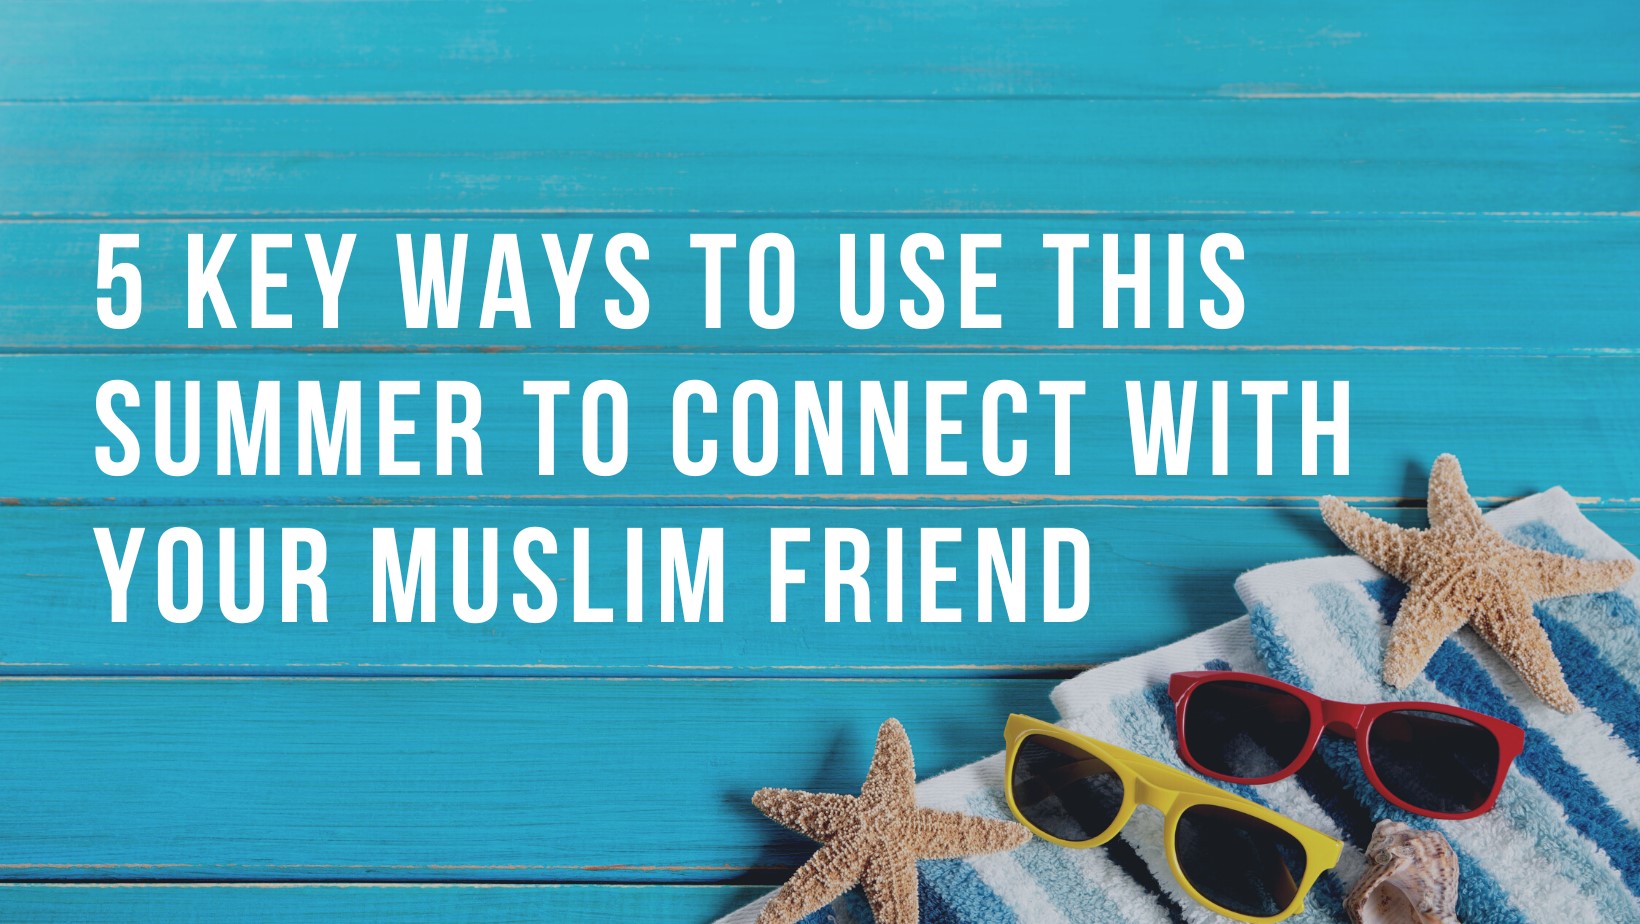 5 key ways to use this summer to connect with your Muslim friend